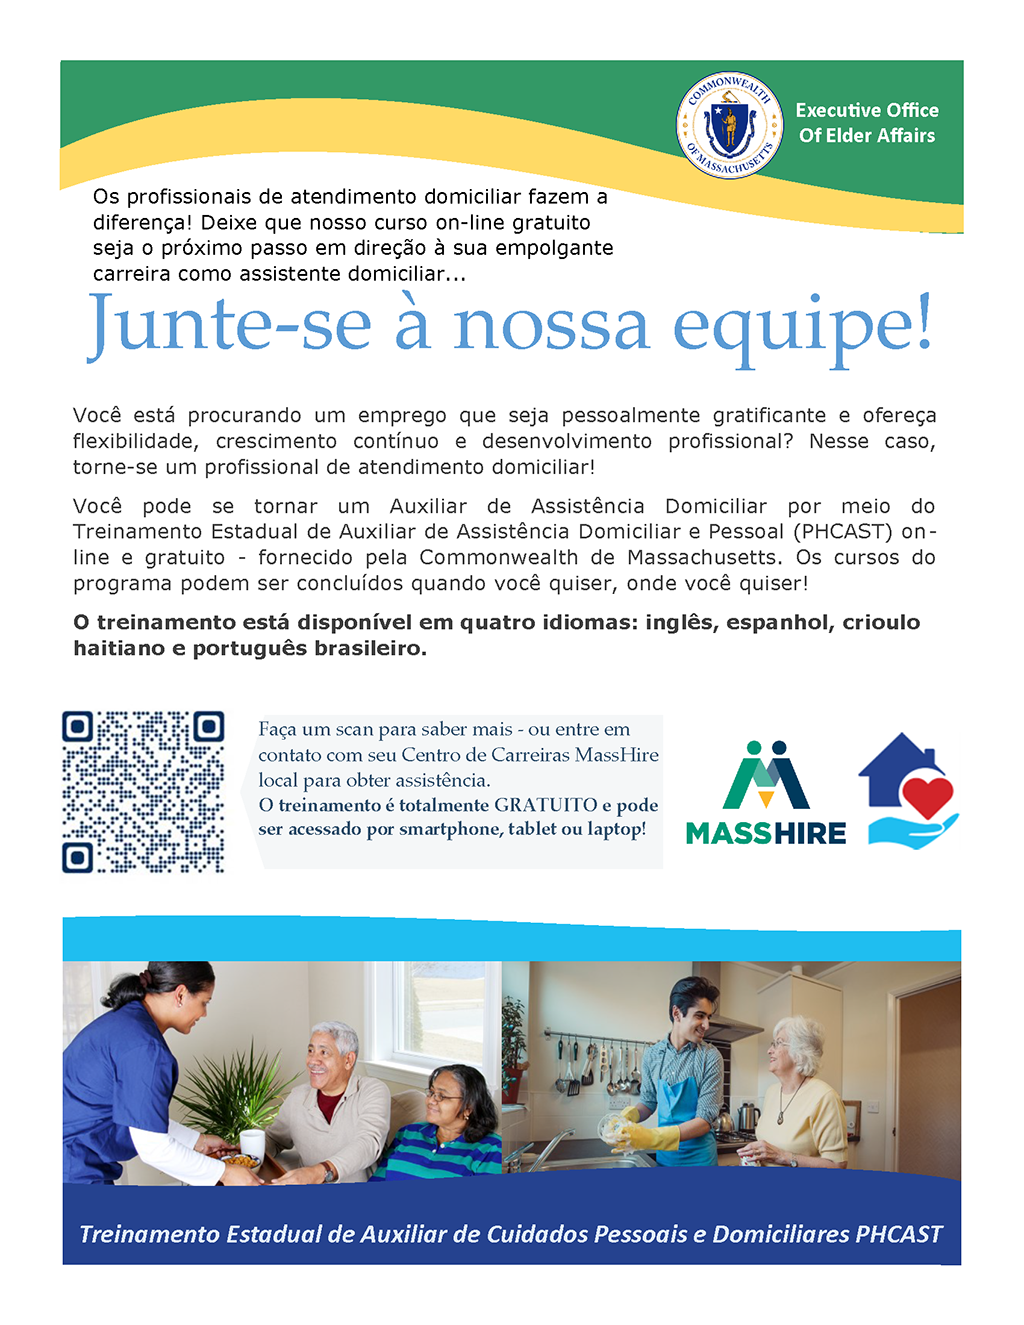 Free Personal Home Care Training in Portuguese